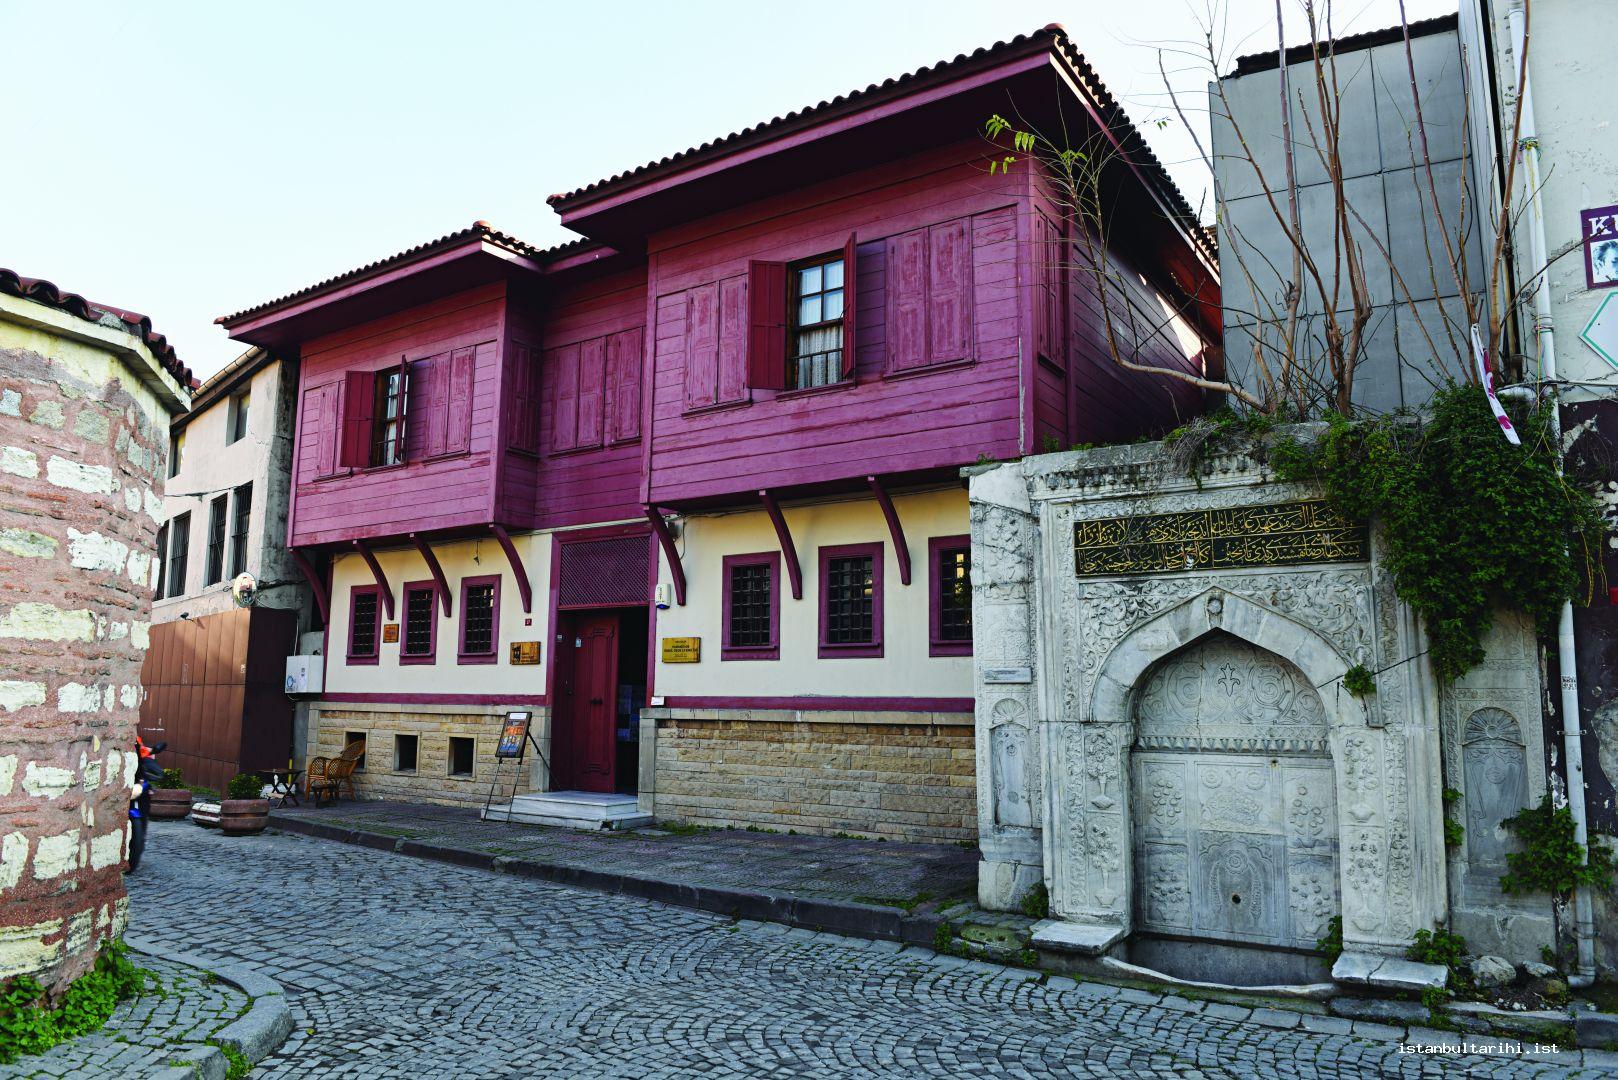 10- The house of Hammamizade İsmail Dede Efendi who was one of the composers of the period of Sultan Selim III    